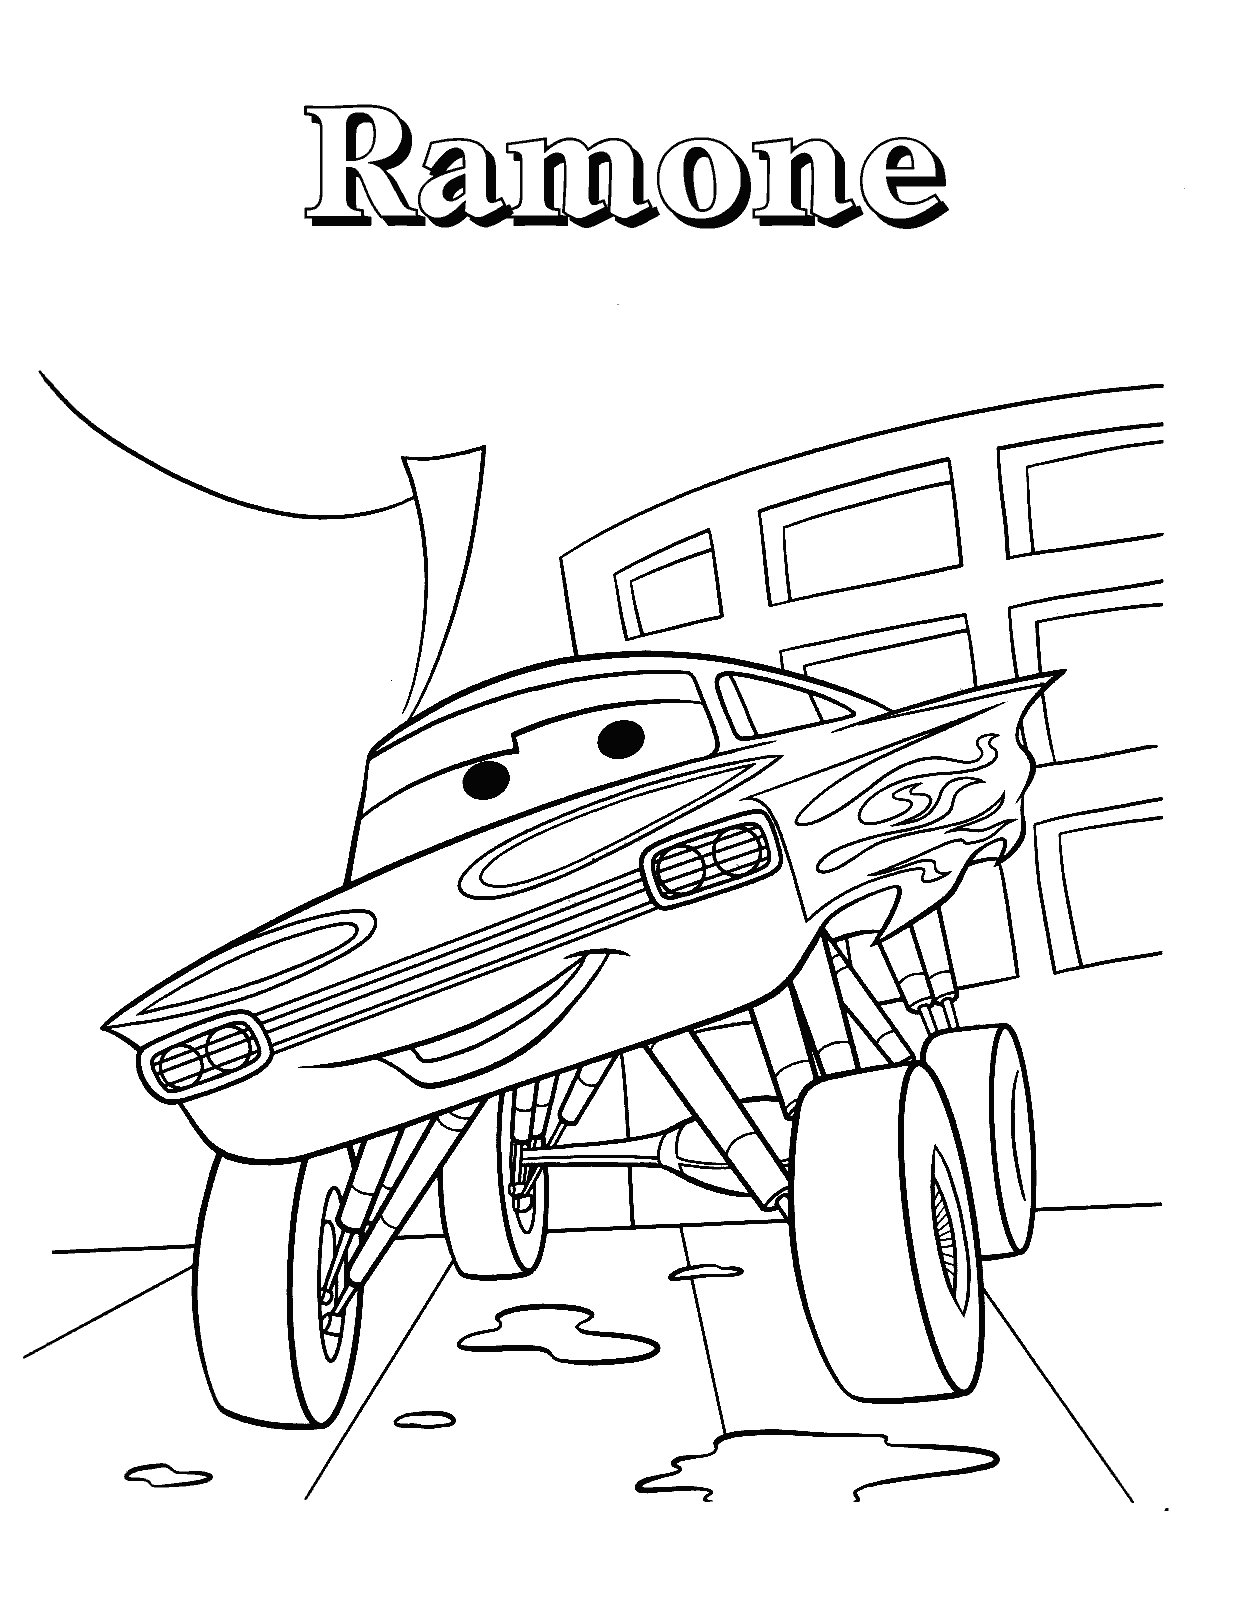 Latest Coloring Pages Archives - Page 25 of 42 - Coloring Pages